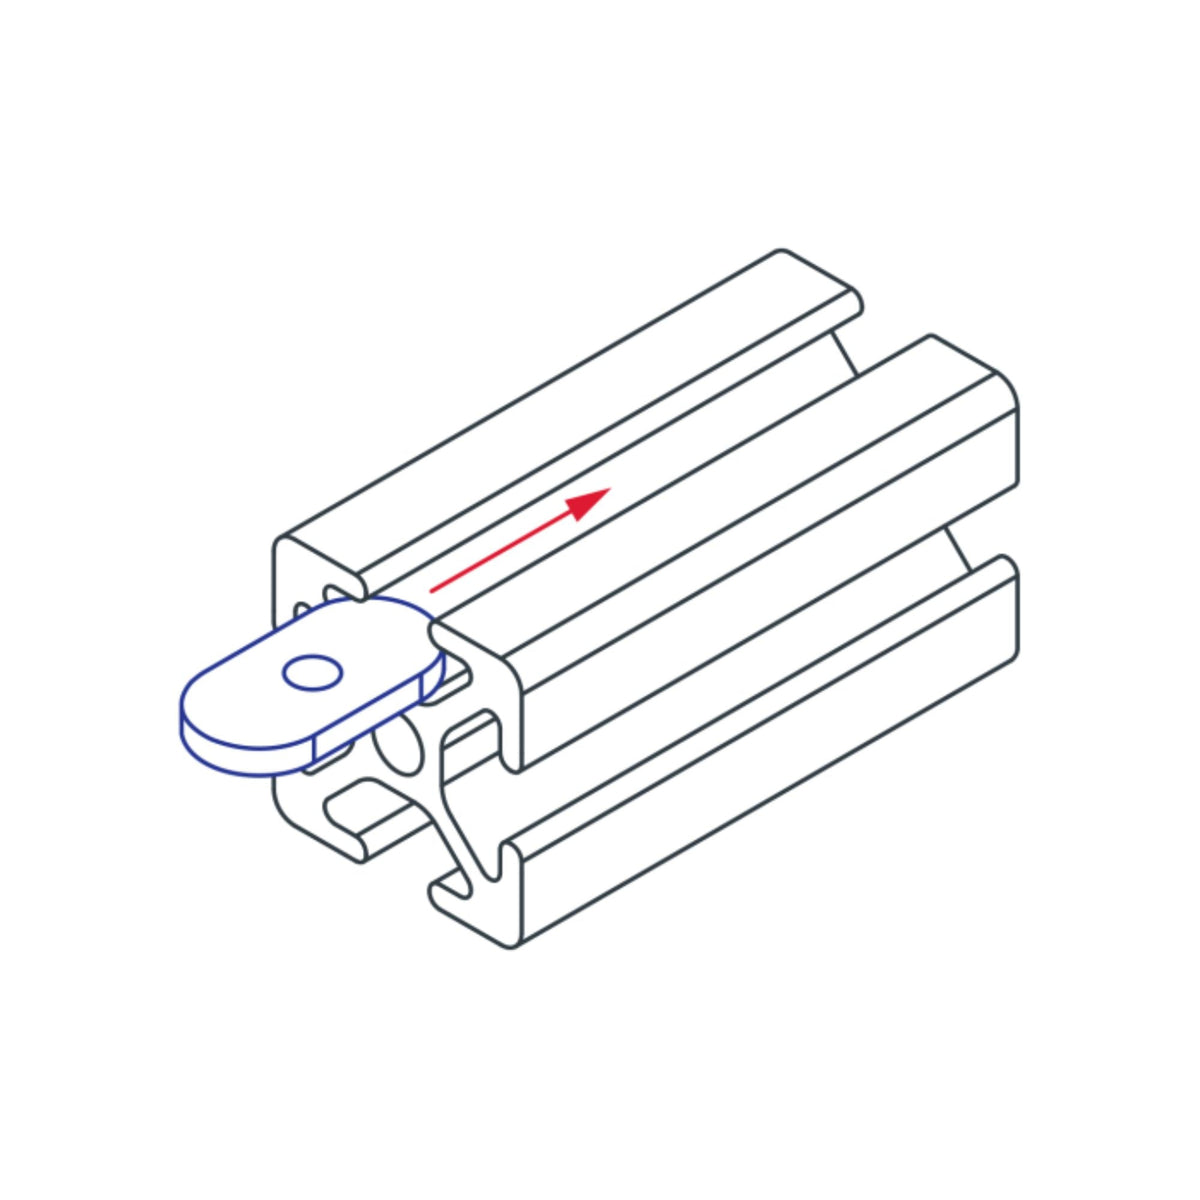 diagram of a t-nut being inserted into a t-slotted bar